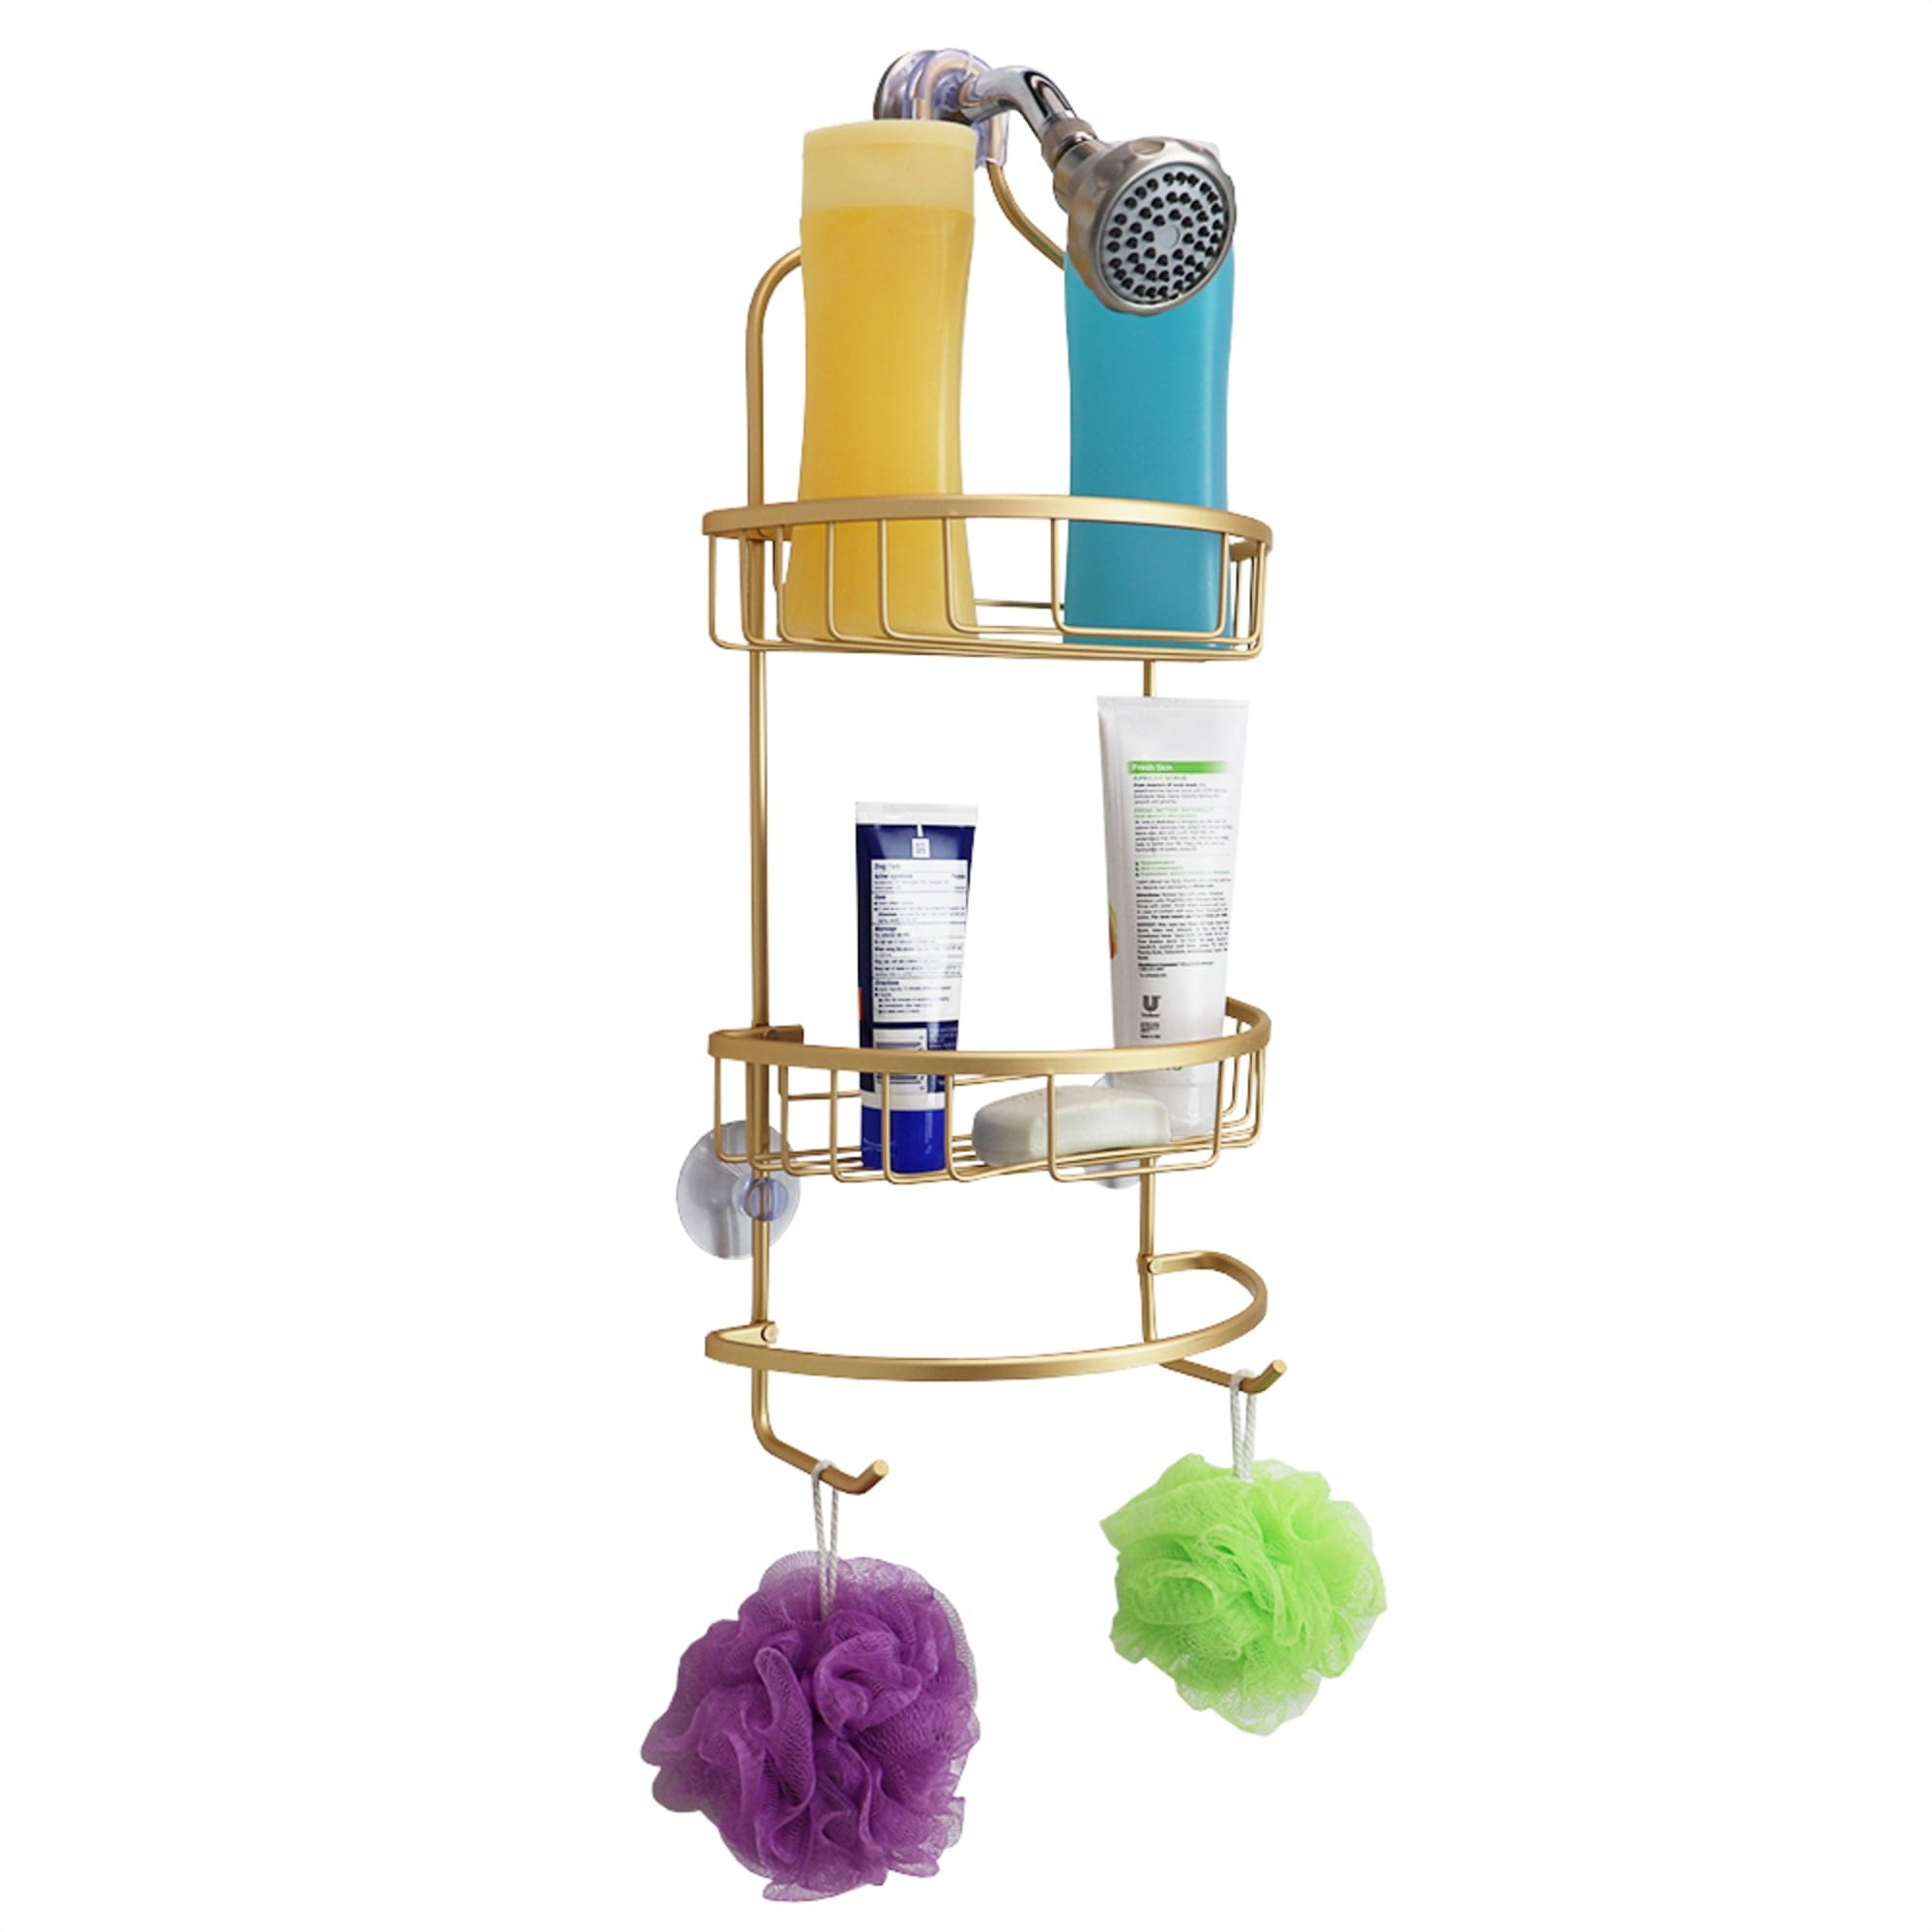 Rocky Mountain Goods Shower Caddy - Rust proof high grade steel -  Designated tiered shelves for shampoo / soap - Razor hangers - Includes  secure suction cup (White) - Rocky Mountain Goods